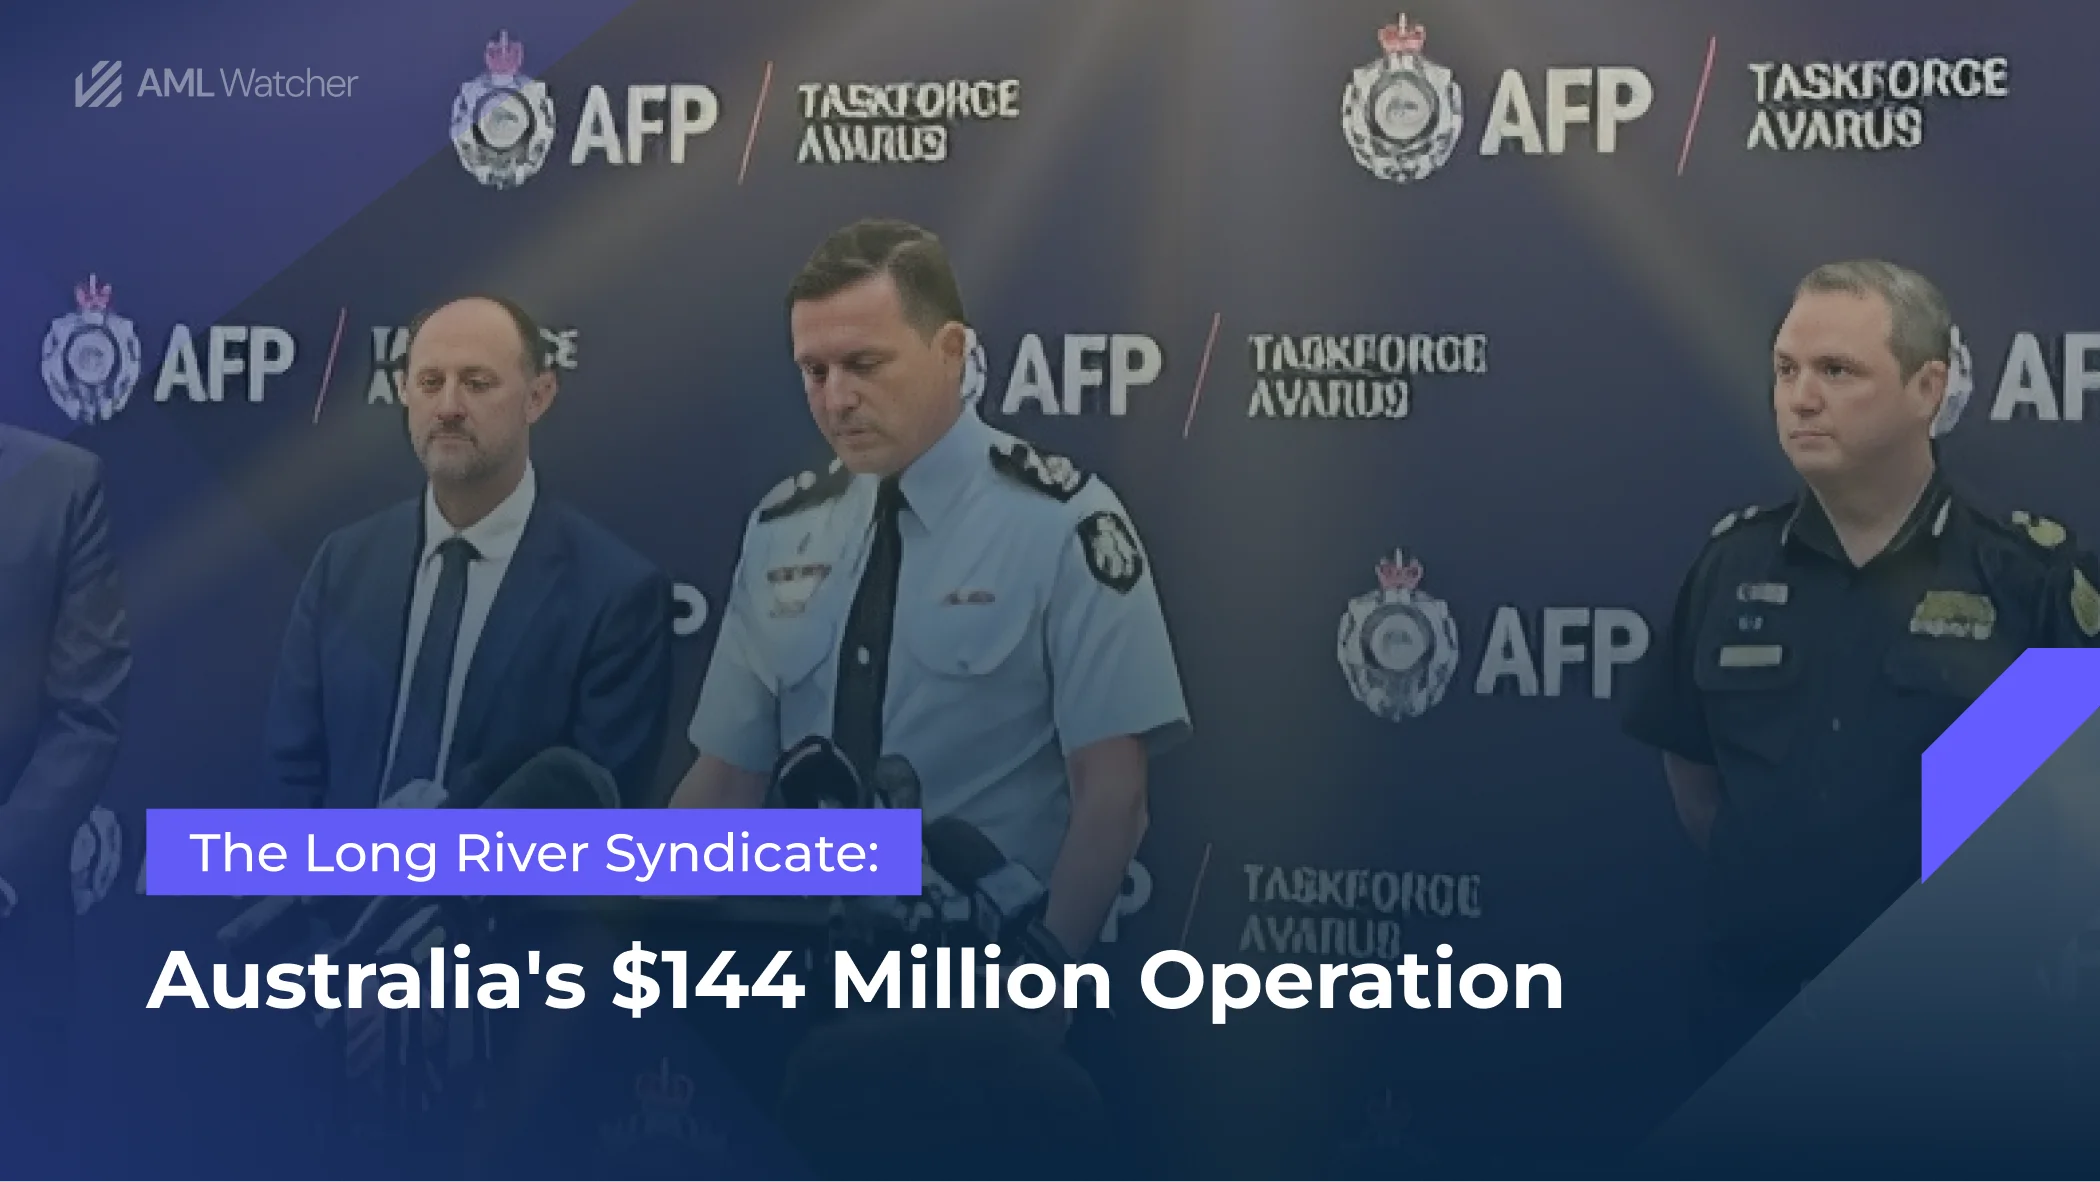  HSI and Australian Federal Police holding Press Conference